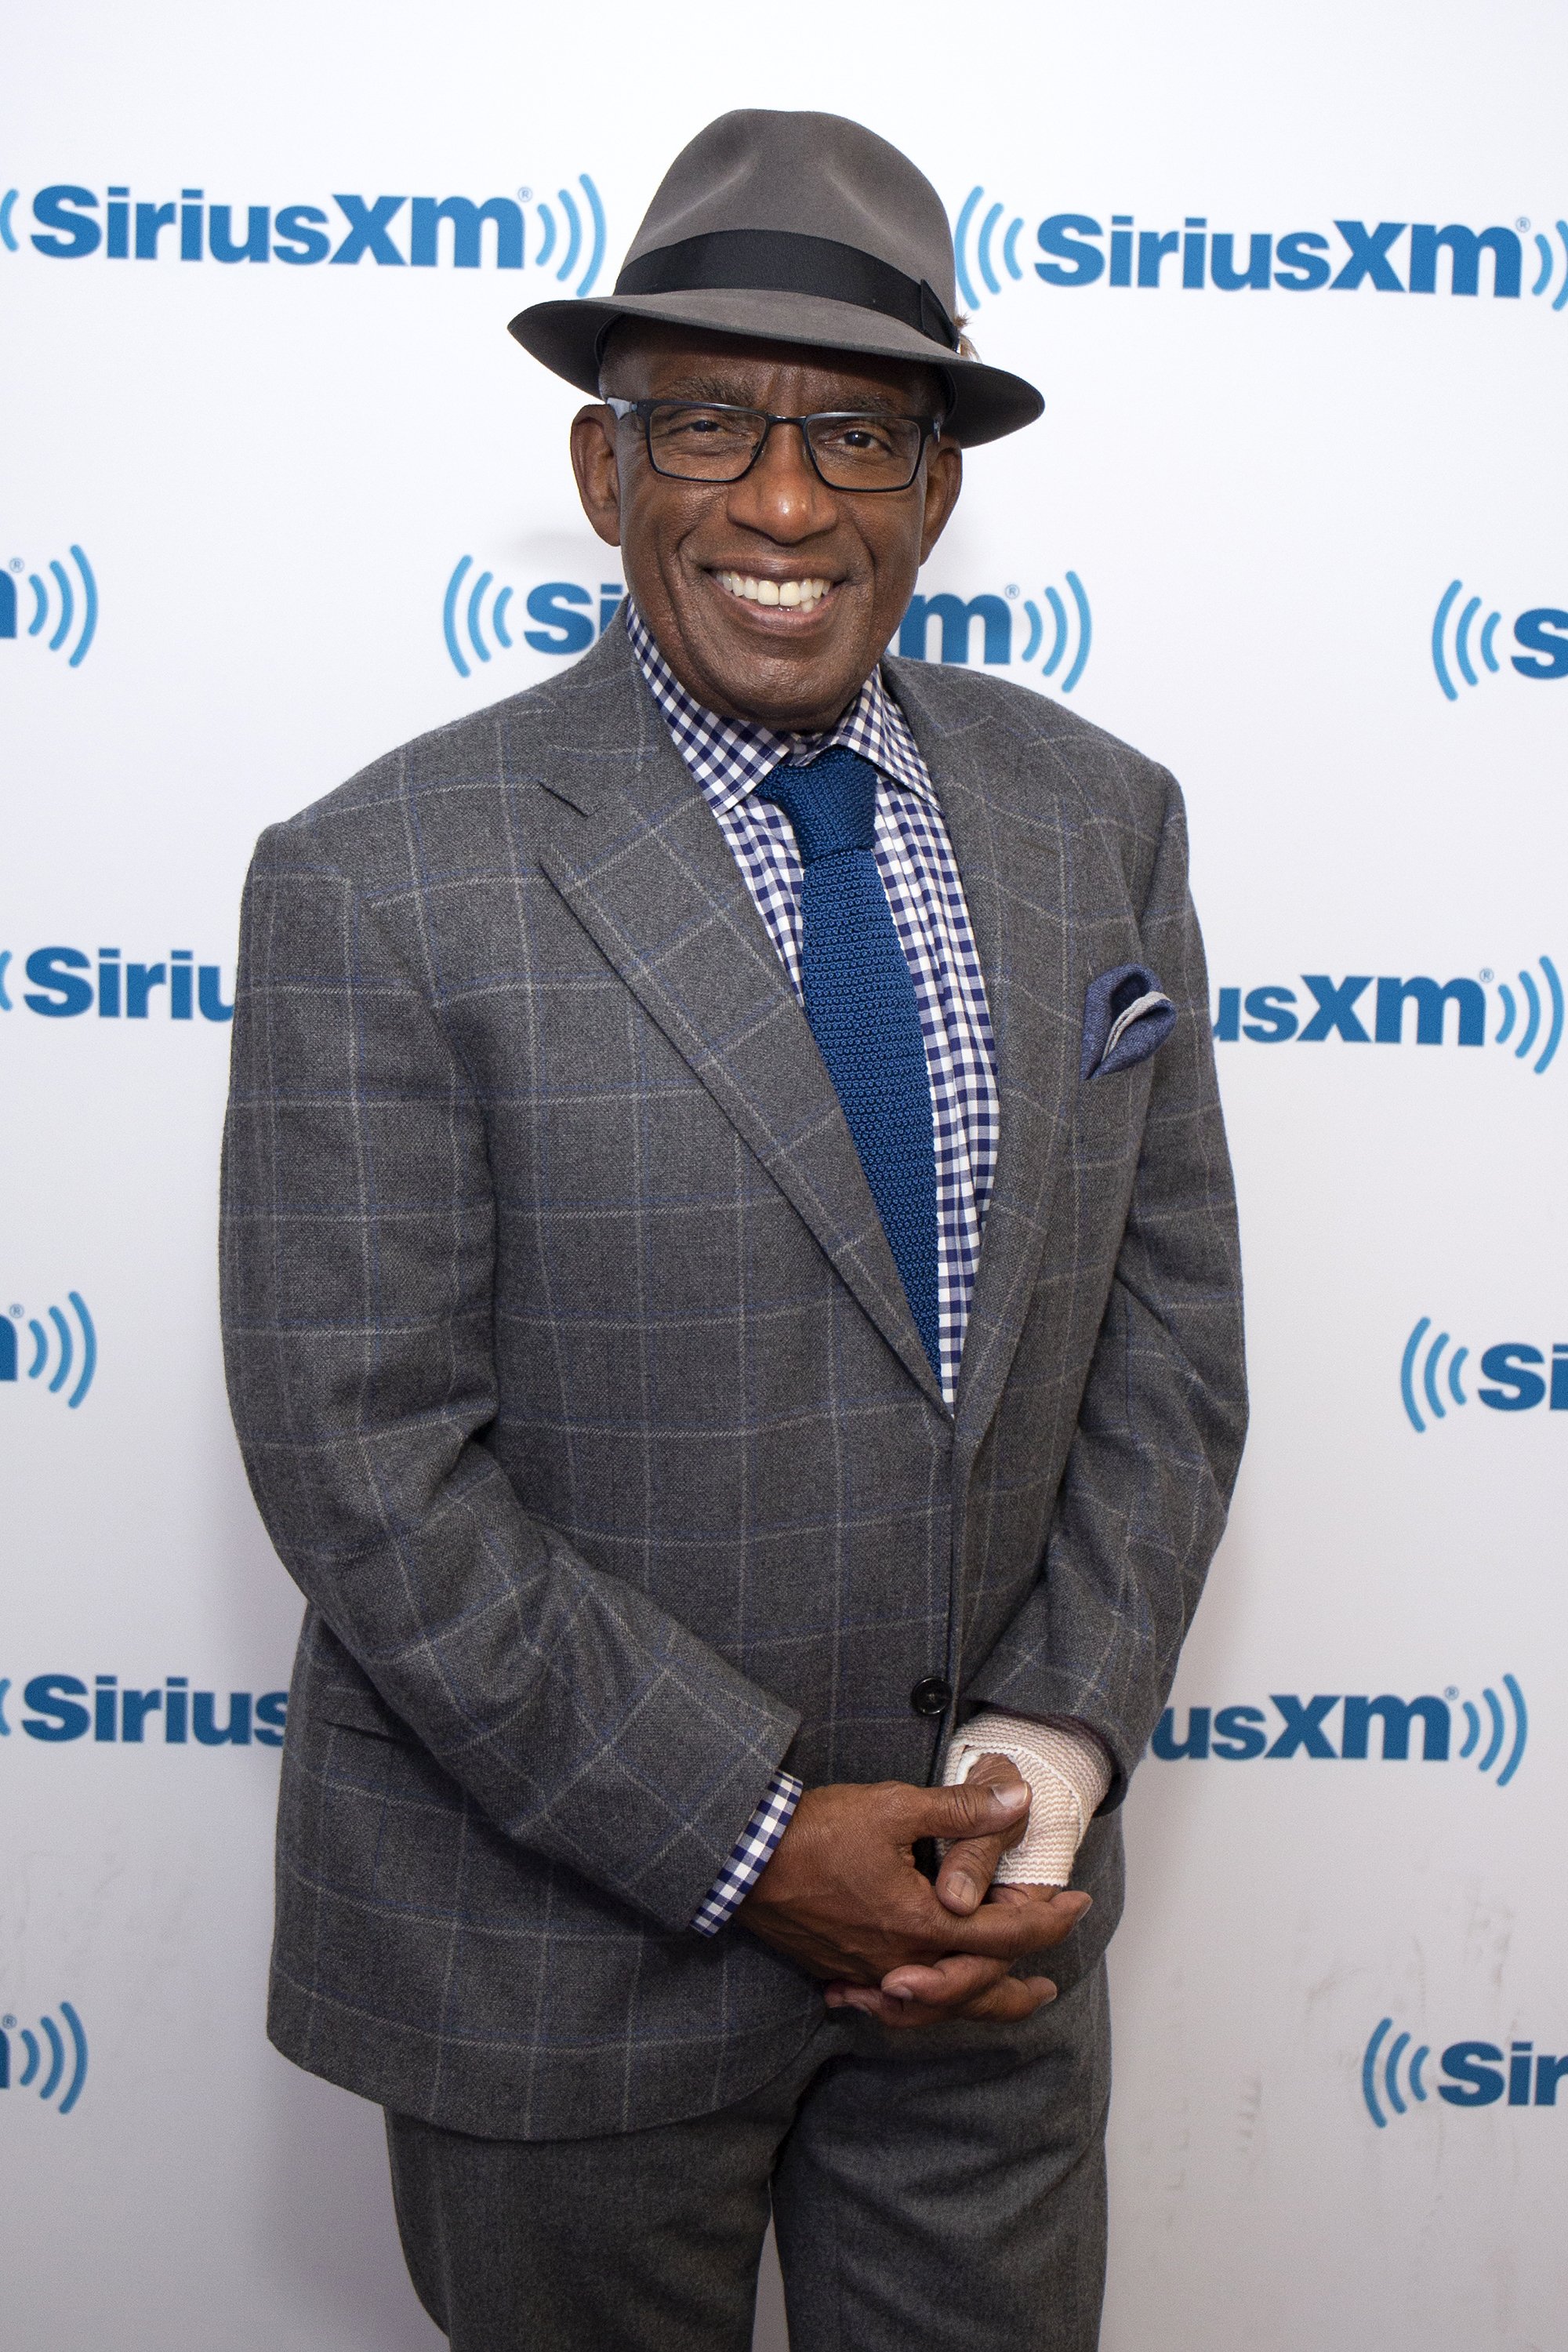 Al Roker on October 2, 2018 in New York City | Photo: Getty Images